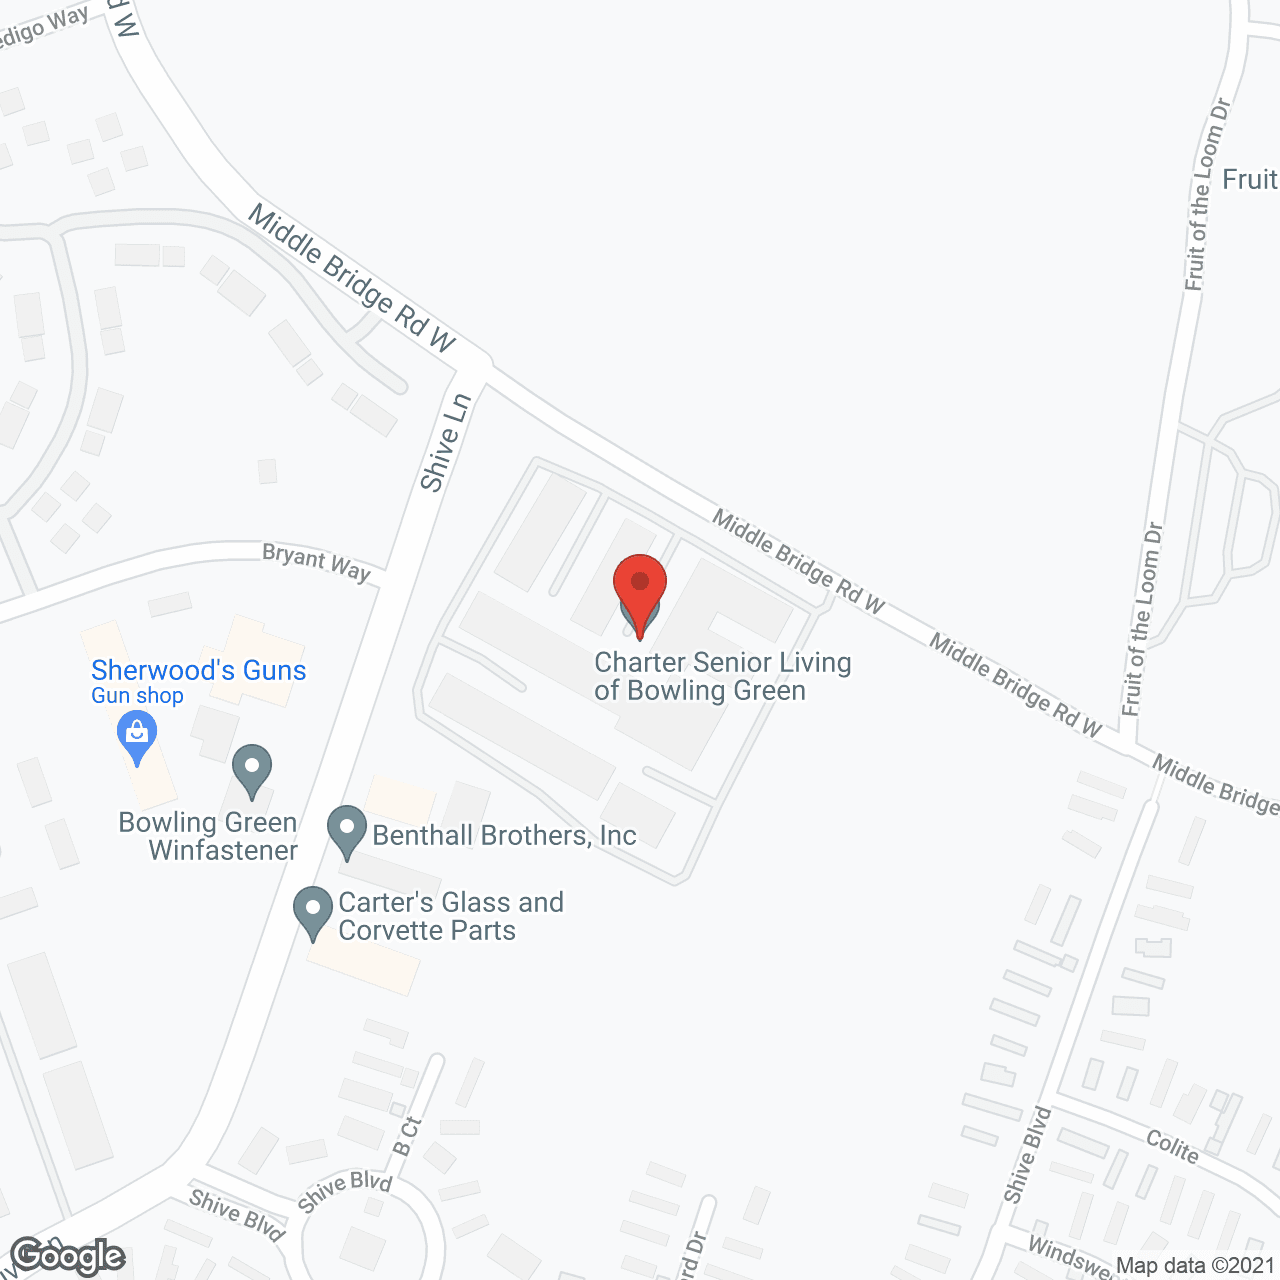 Charter Senior Living of Bowling Green in google map